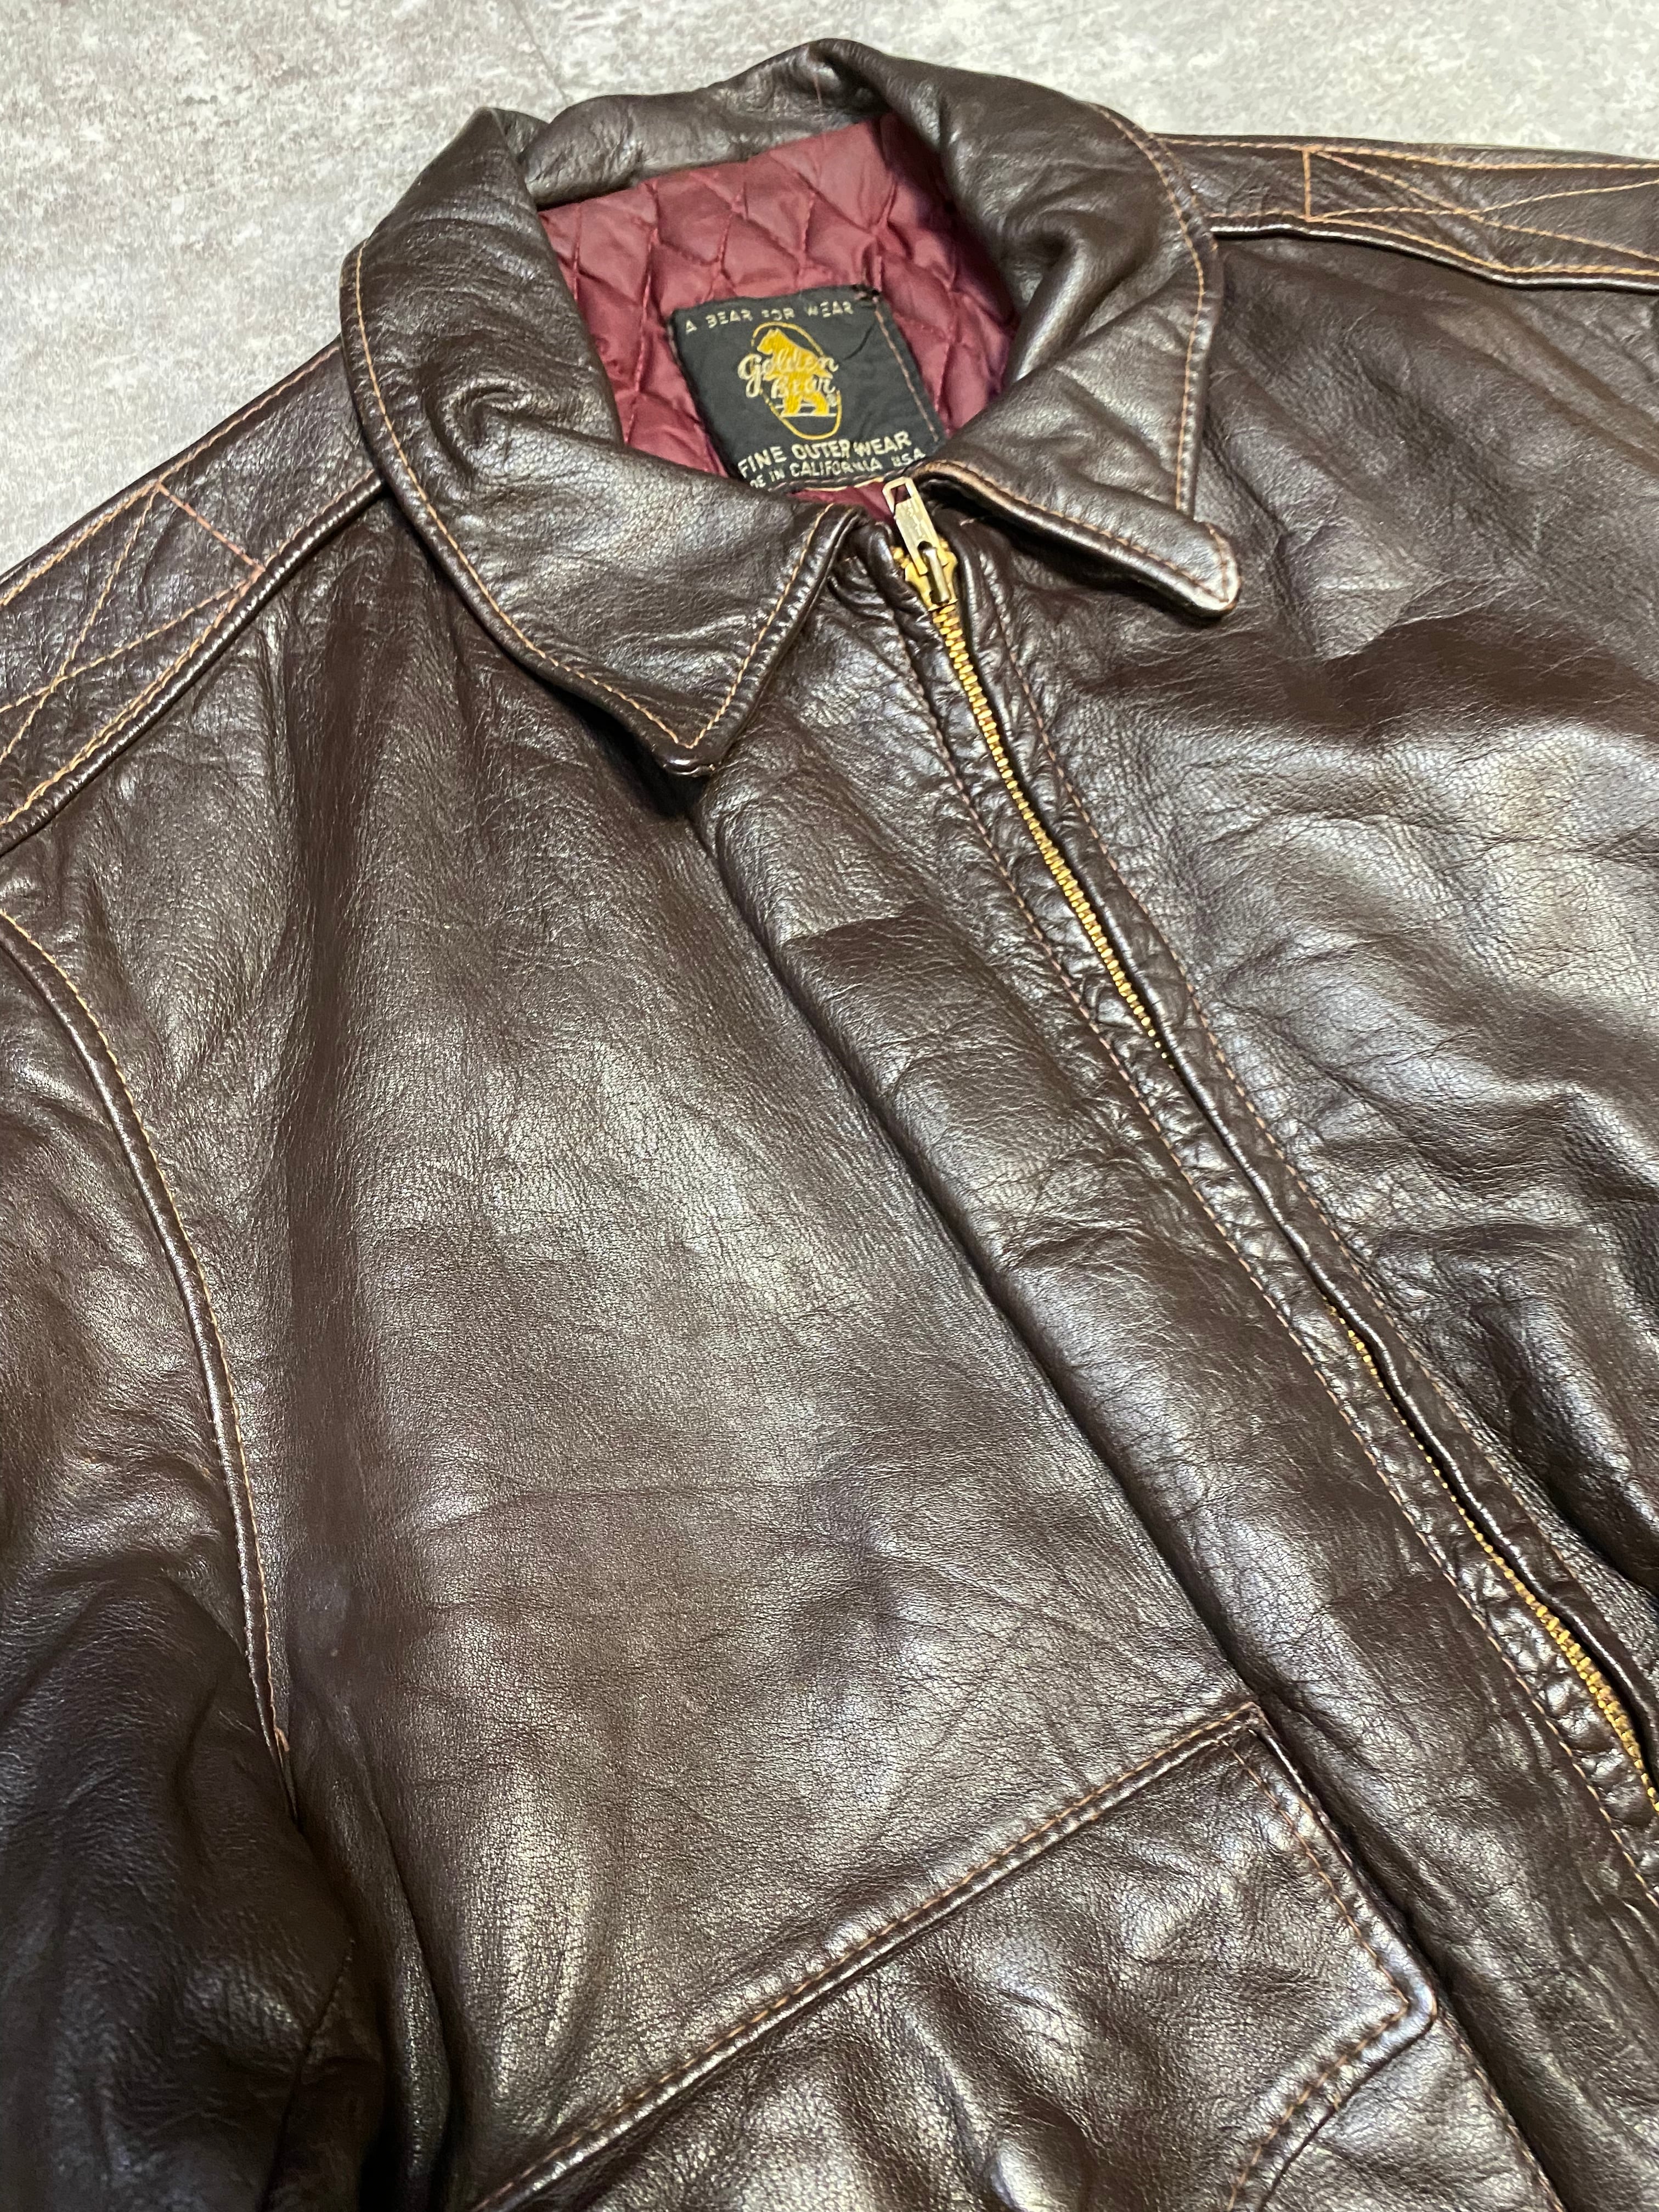 70s GOLDEN BEAR A-2 リプロダクト made in USA レザージャケット